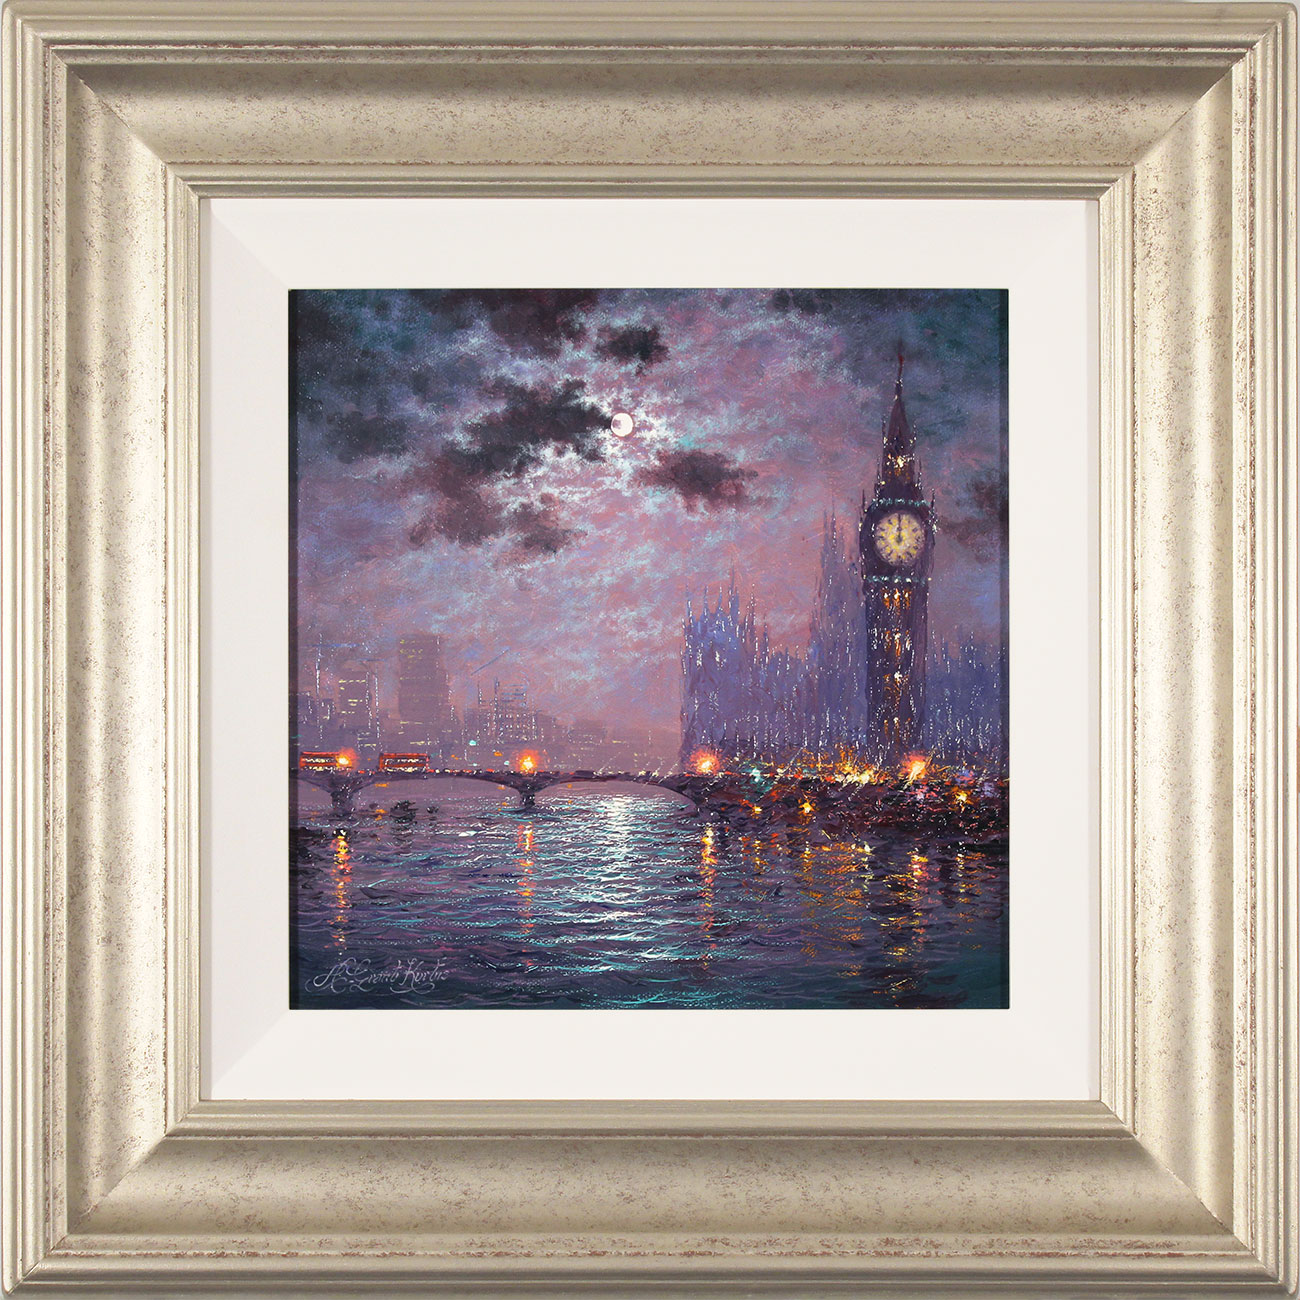 Andrew Grant Kurtis, Original oil painting on canvas, Westminster Chimes at Midnight. Click to enlarge